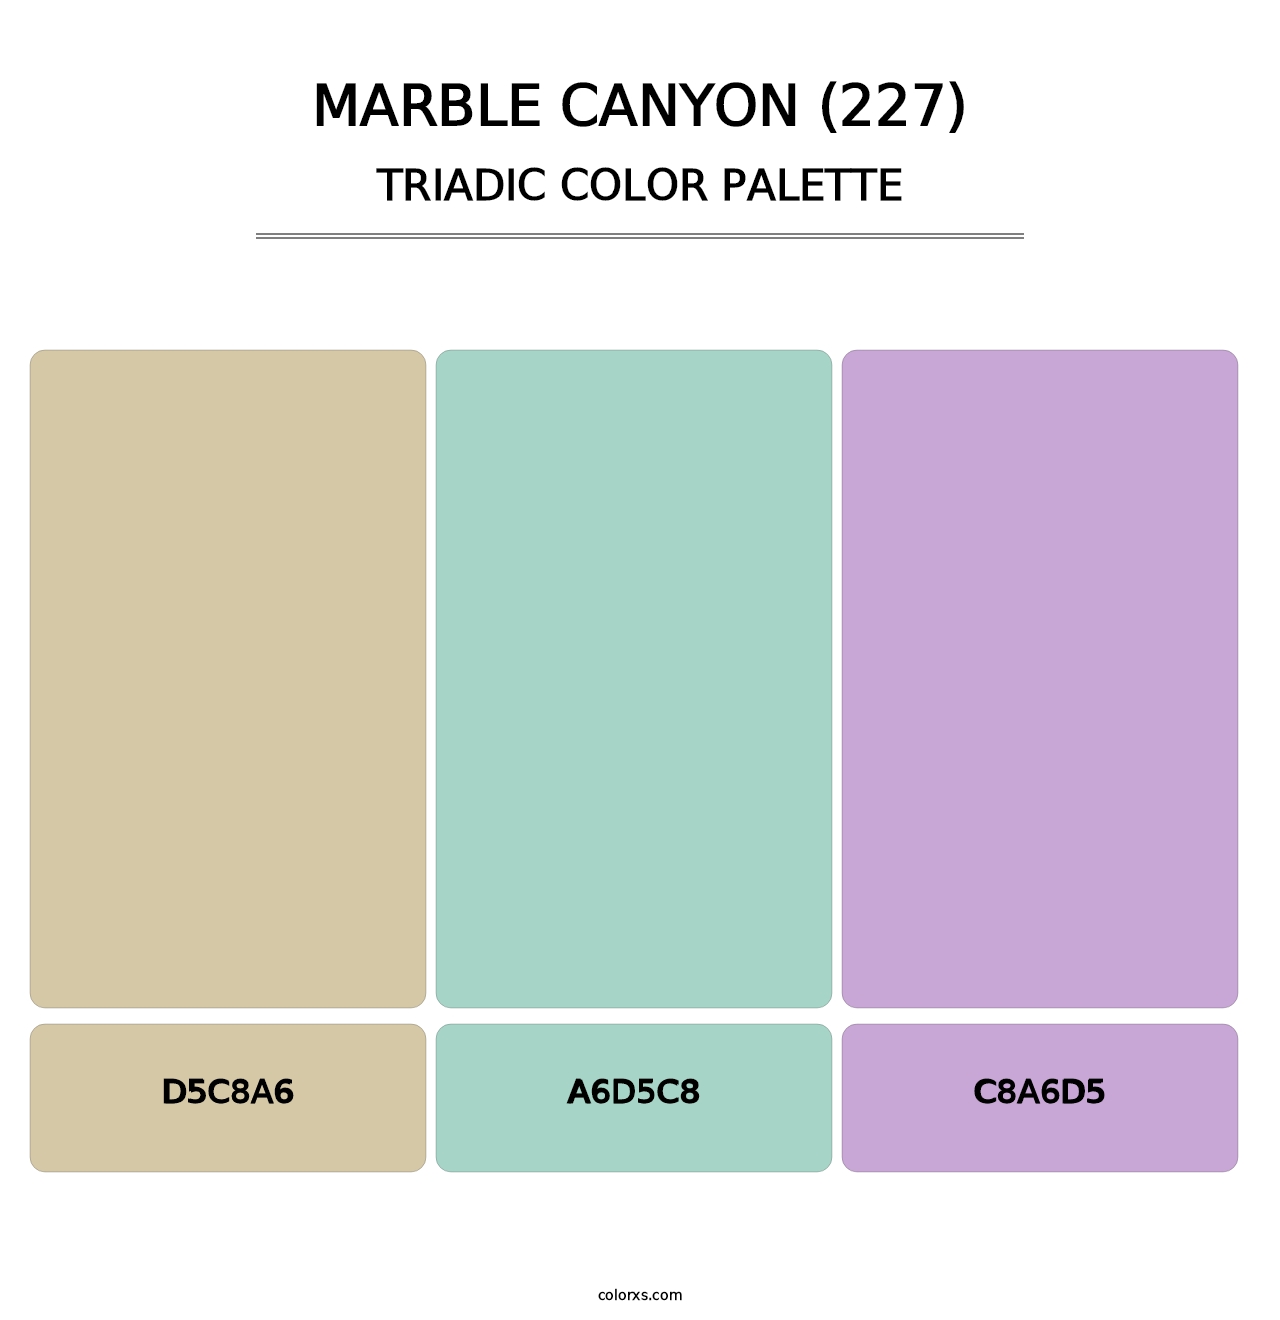 Marble Canyon (227) - Triadic Color Palette